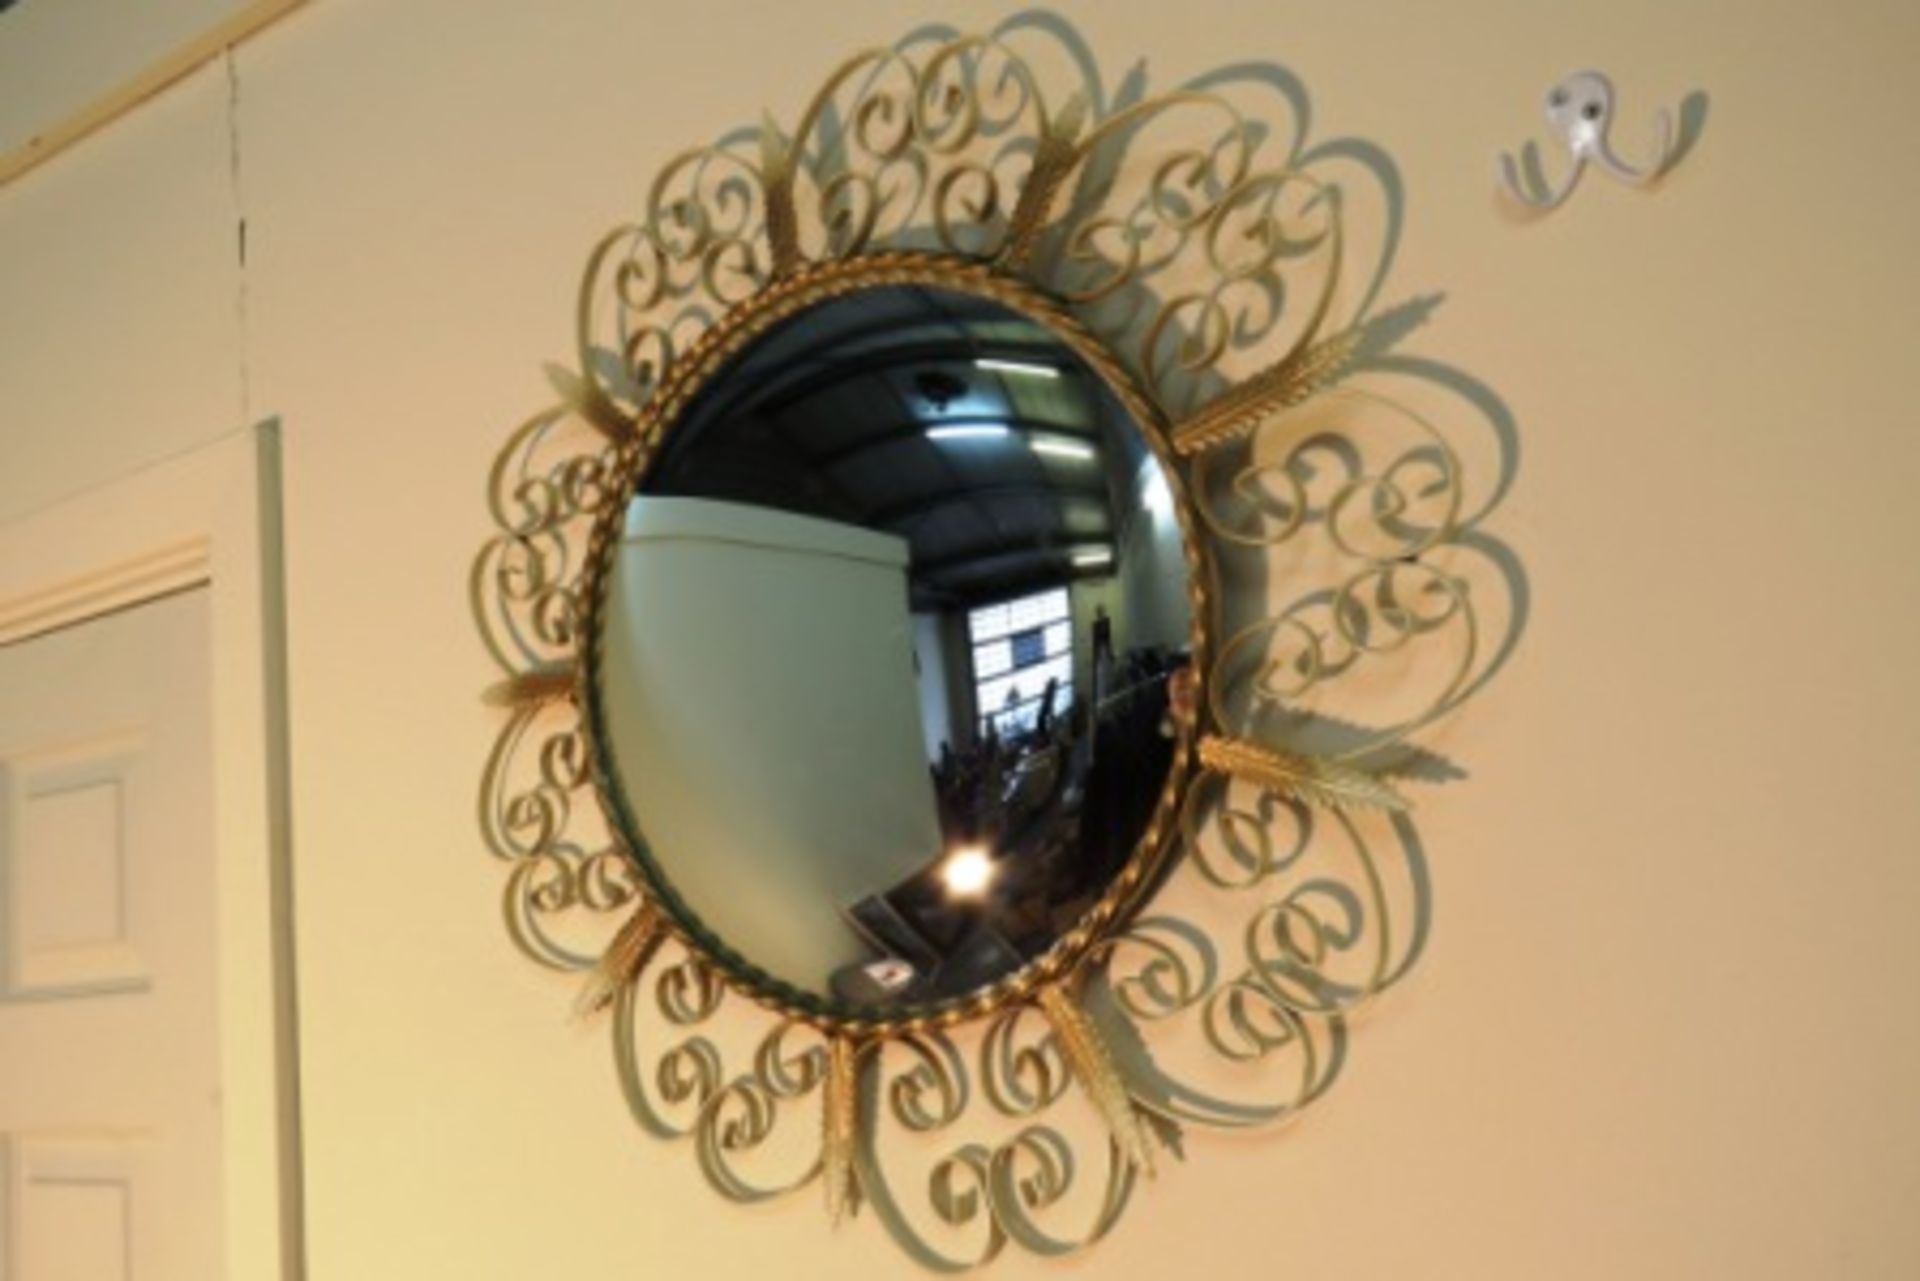 LARGE RETRO WROUGHT IRON CONVEX MIRROR WITH FLORAL SURROUND - Image 3 of 4